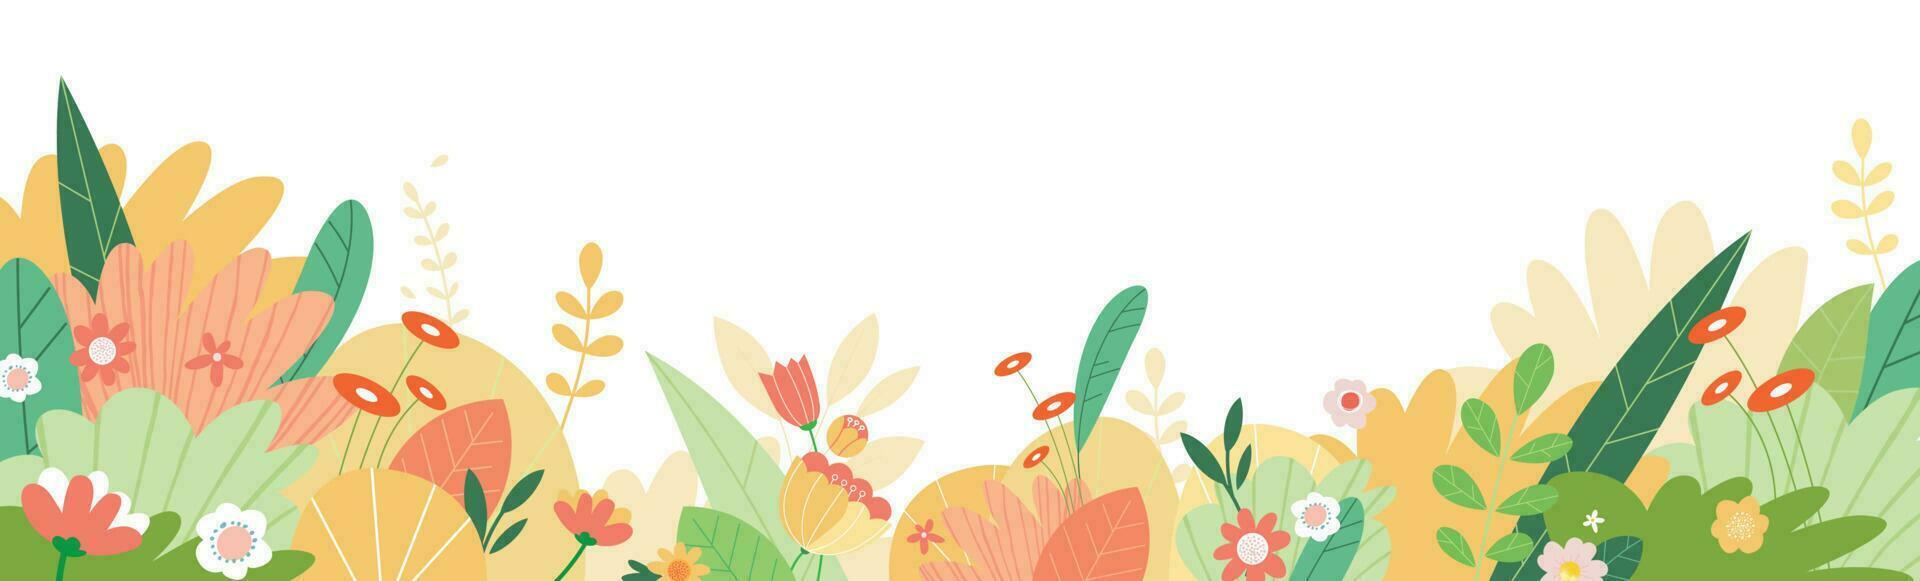 Nature background. Vector illustration for graphic and web design, social media, banner, wedding, advertising.